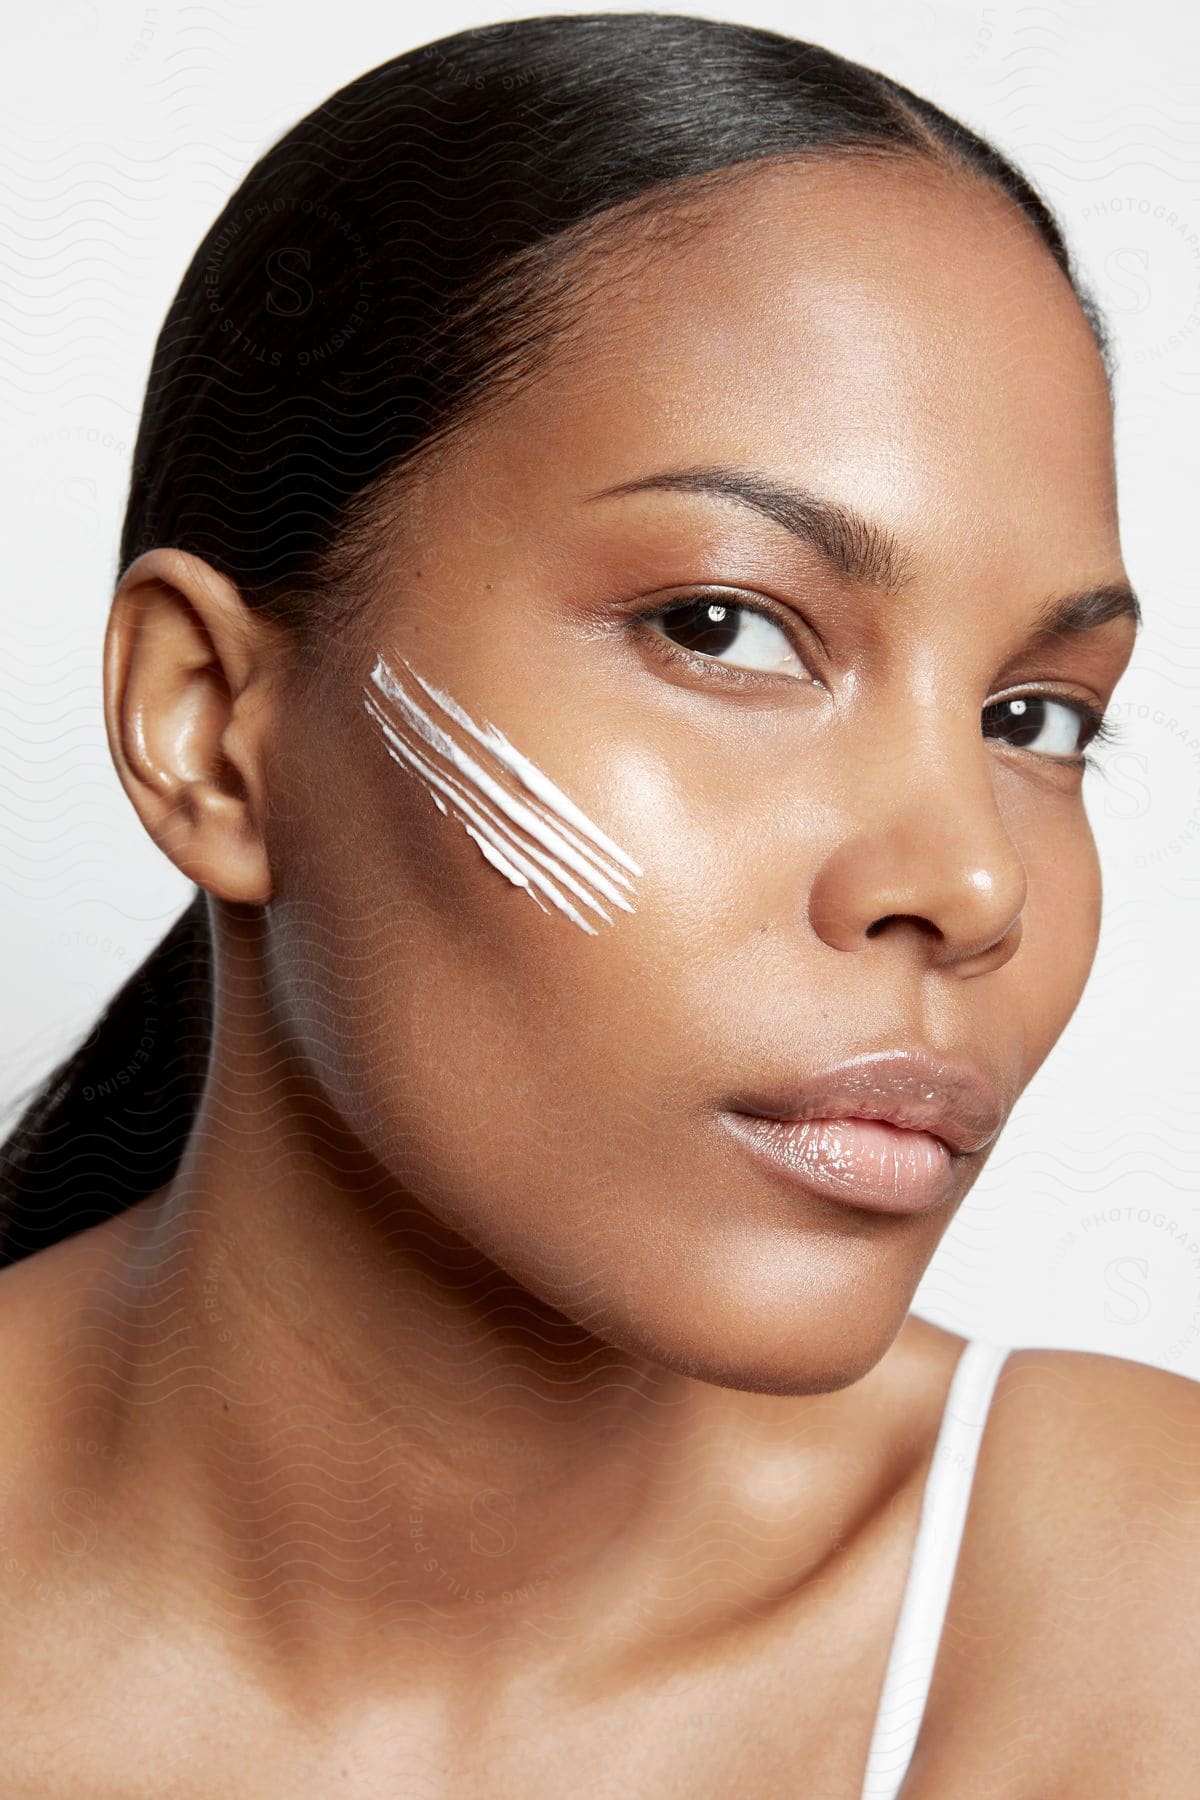 A woman with lines of white cream on her cheek is looking forward